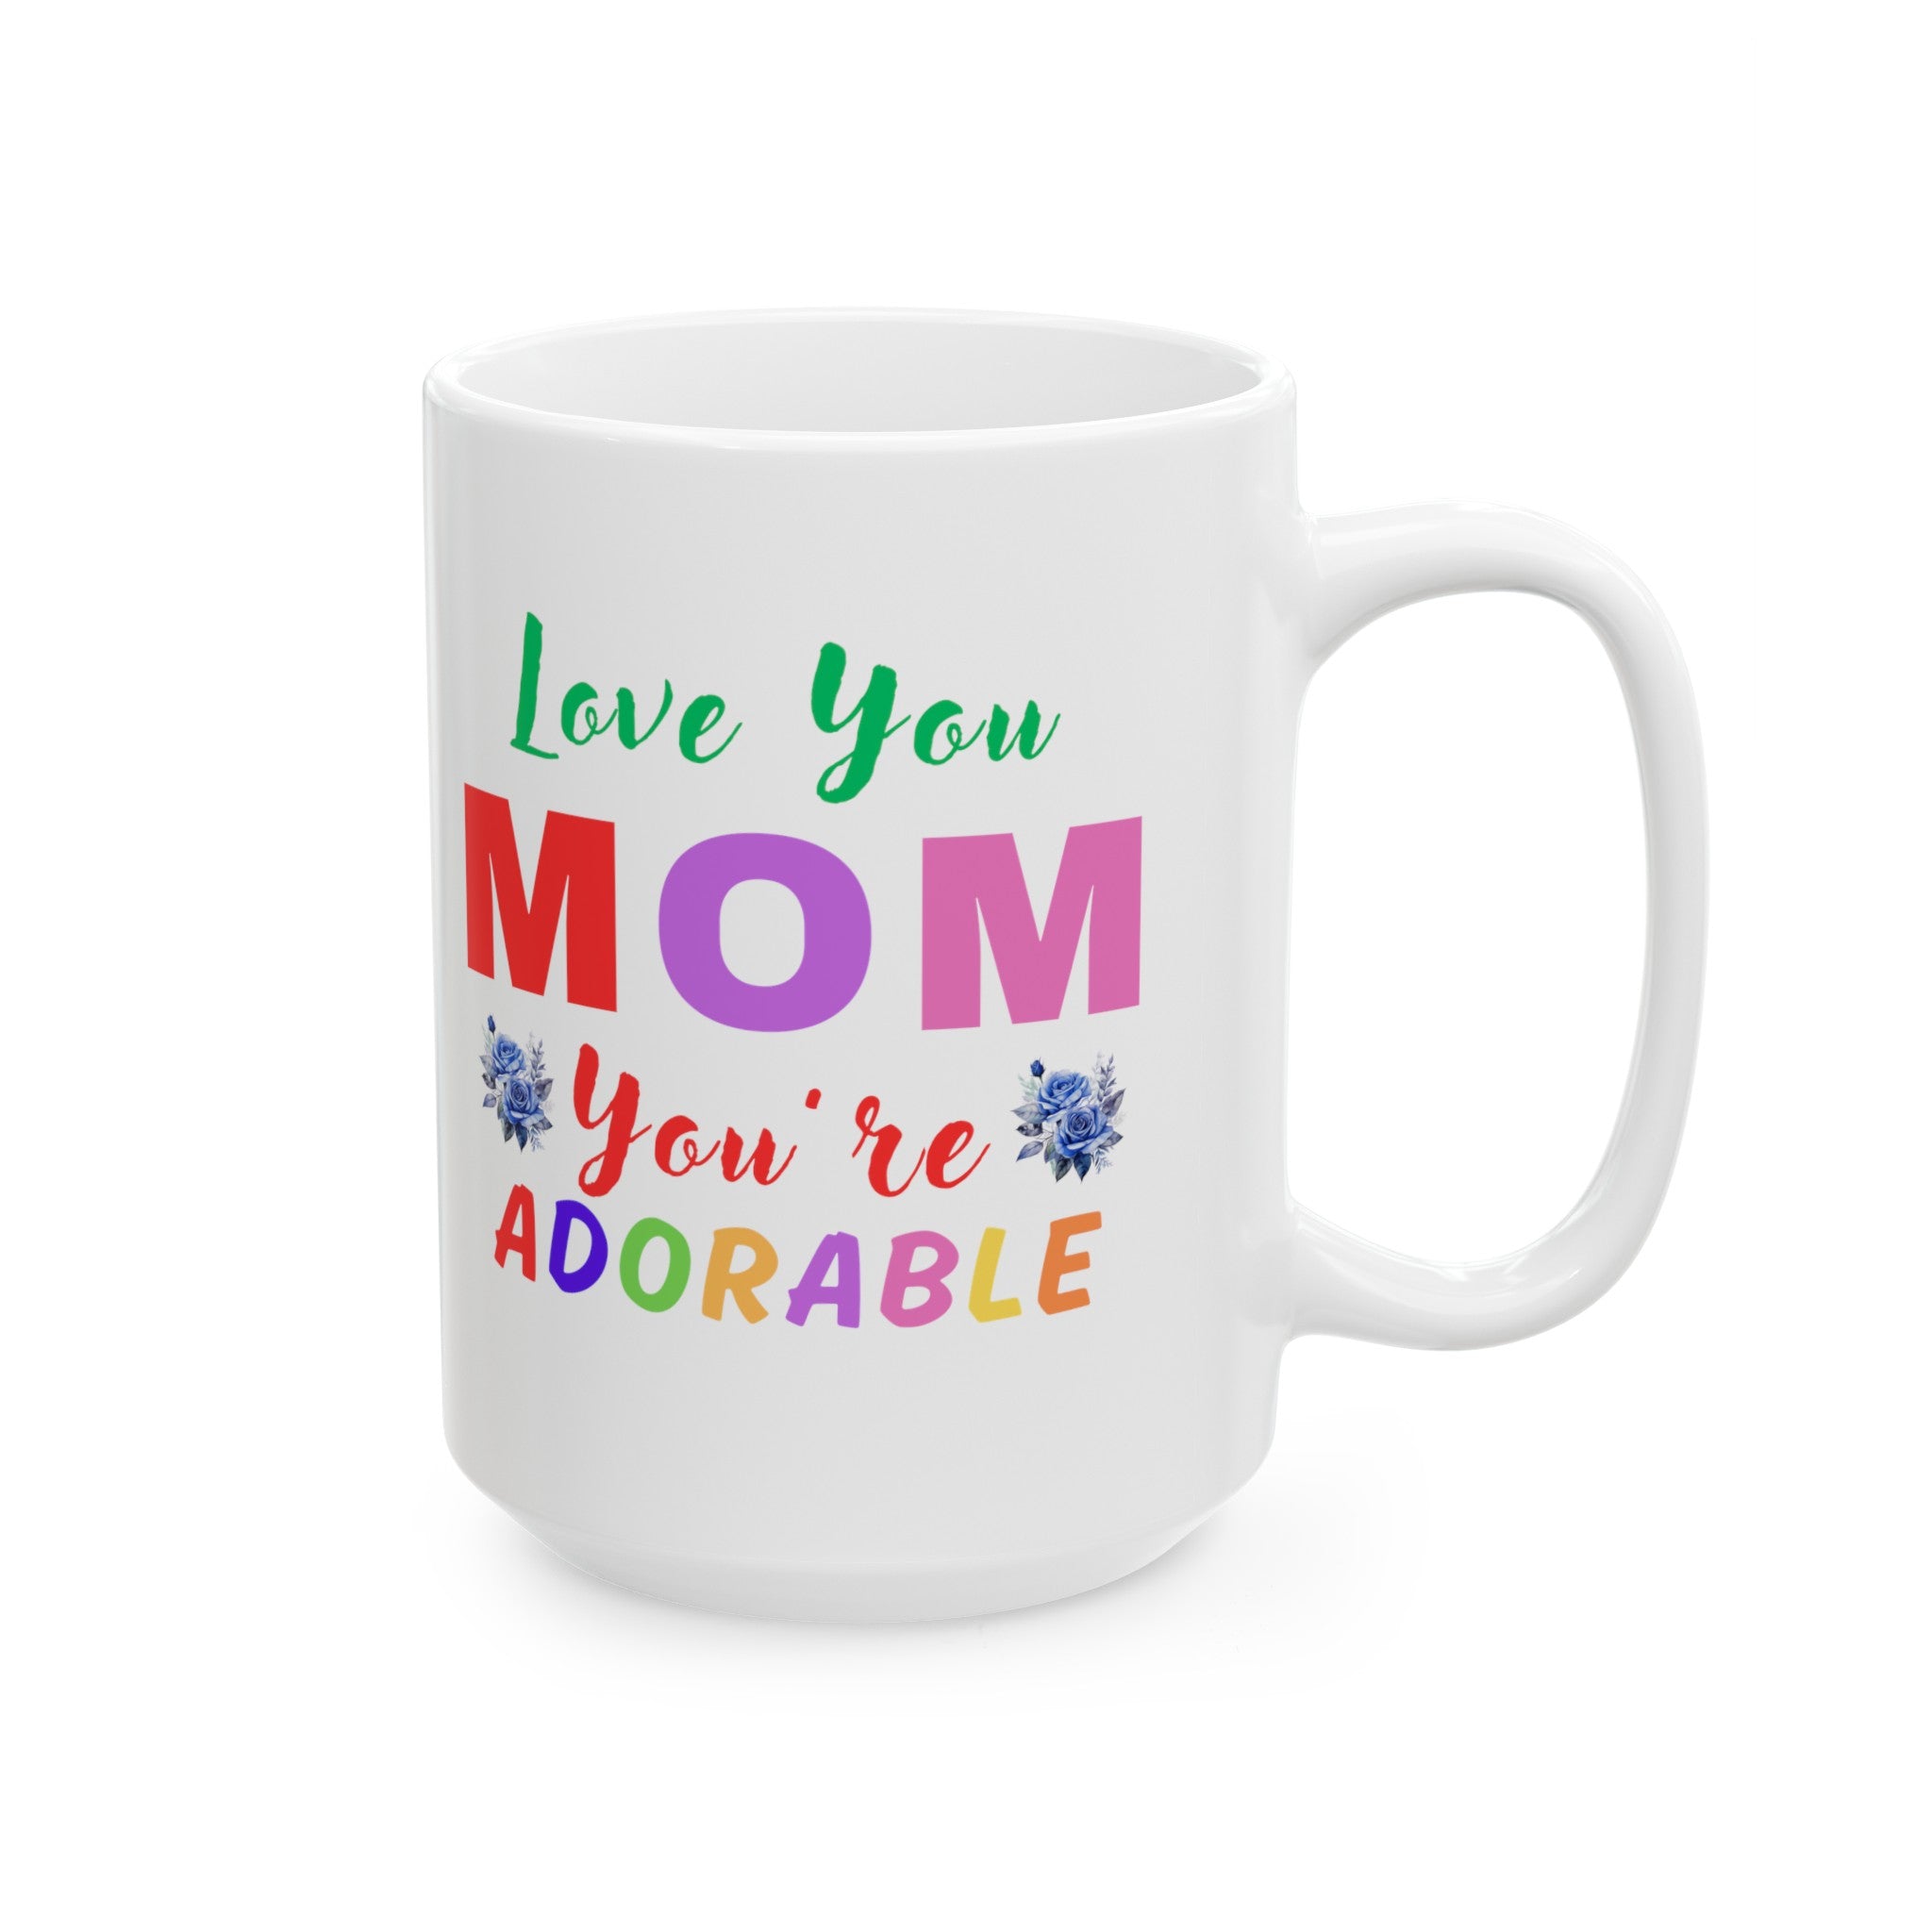 Mother's Day Gift Love You Mom You are adorable Ceramic Mug, (11oz, 15oz), Gift for Mom, Gift from Dad, Gift from Son, Gift from Daughter